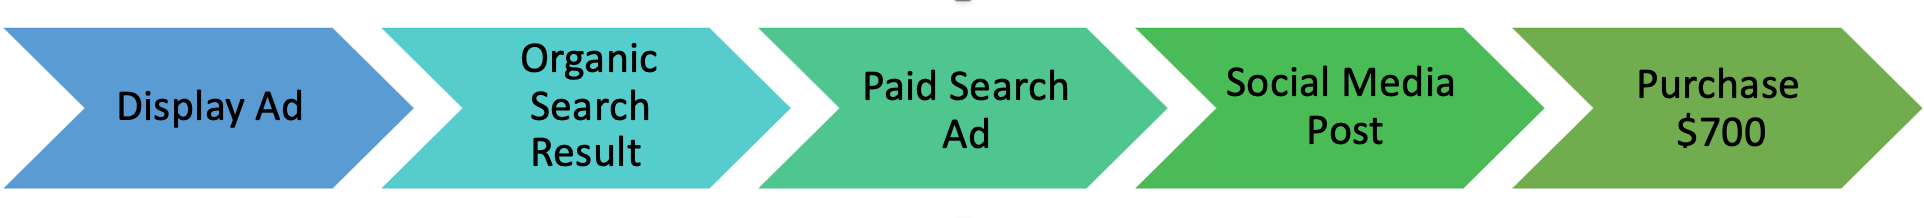 Marketing Attribution Example: display ad, organic search result, paid search ad, social media post, purchase $700